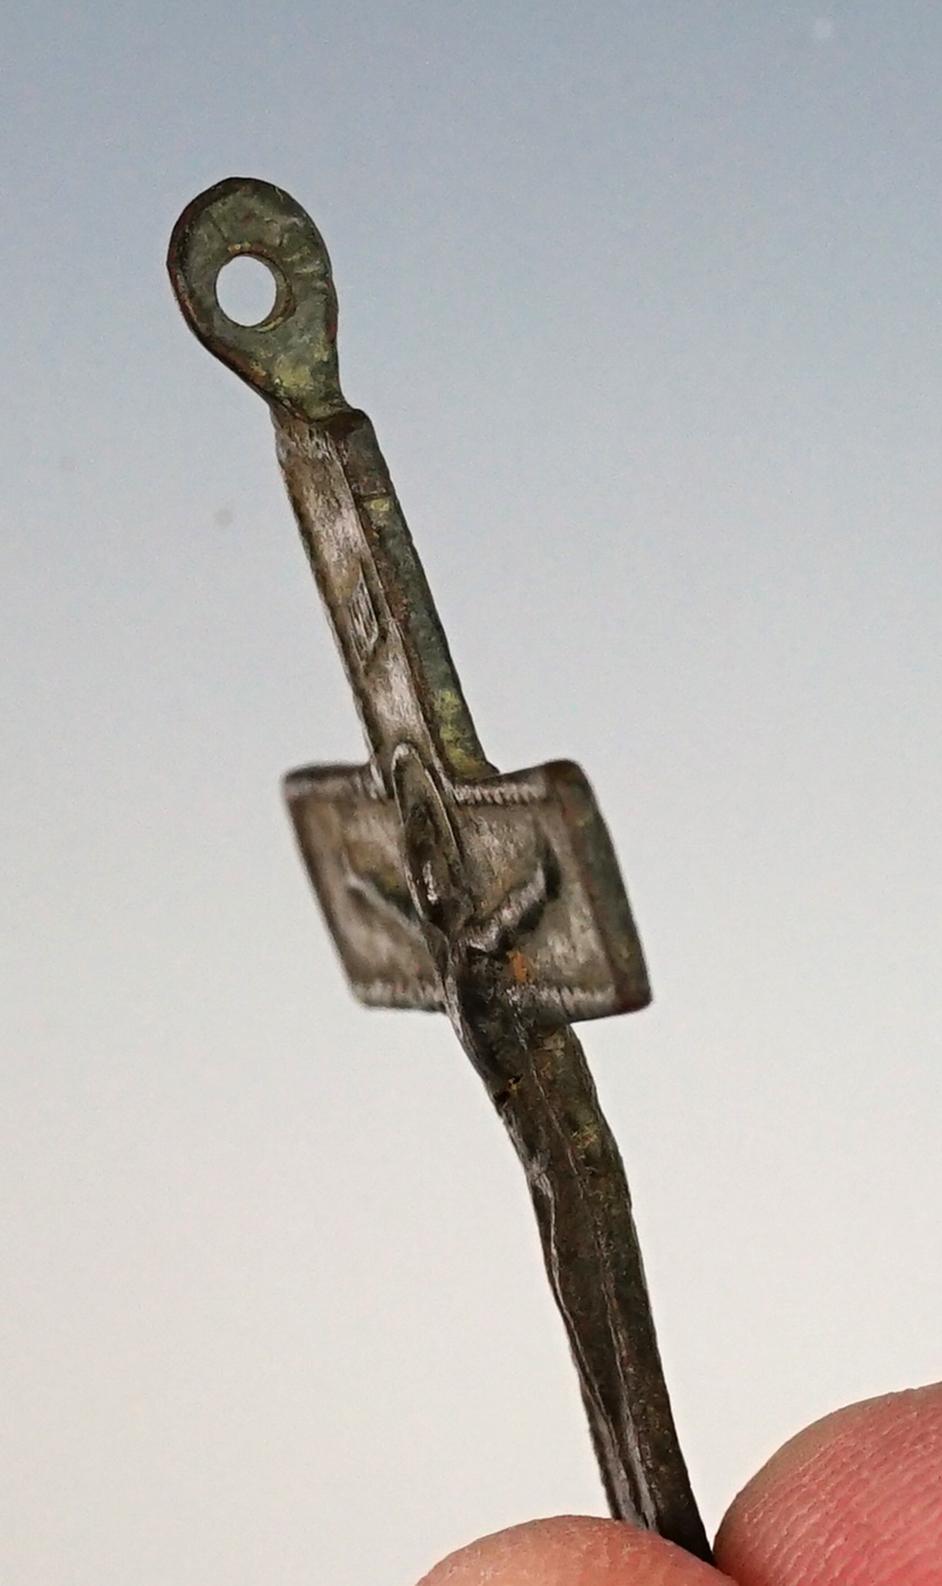 1 1/2" Trade Cross in good condition. Recoverd at the Townley Reed Site in Geneva, New York.